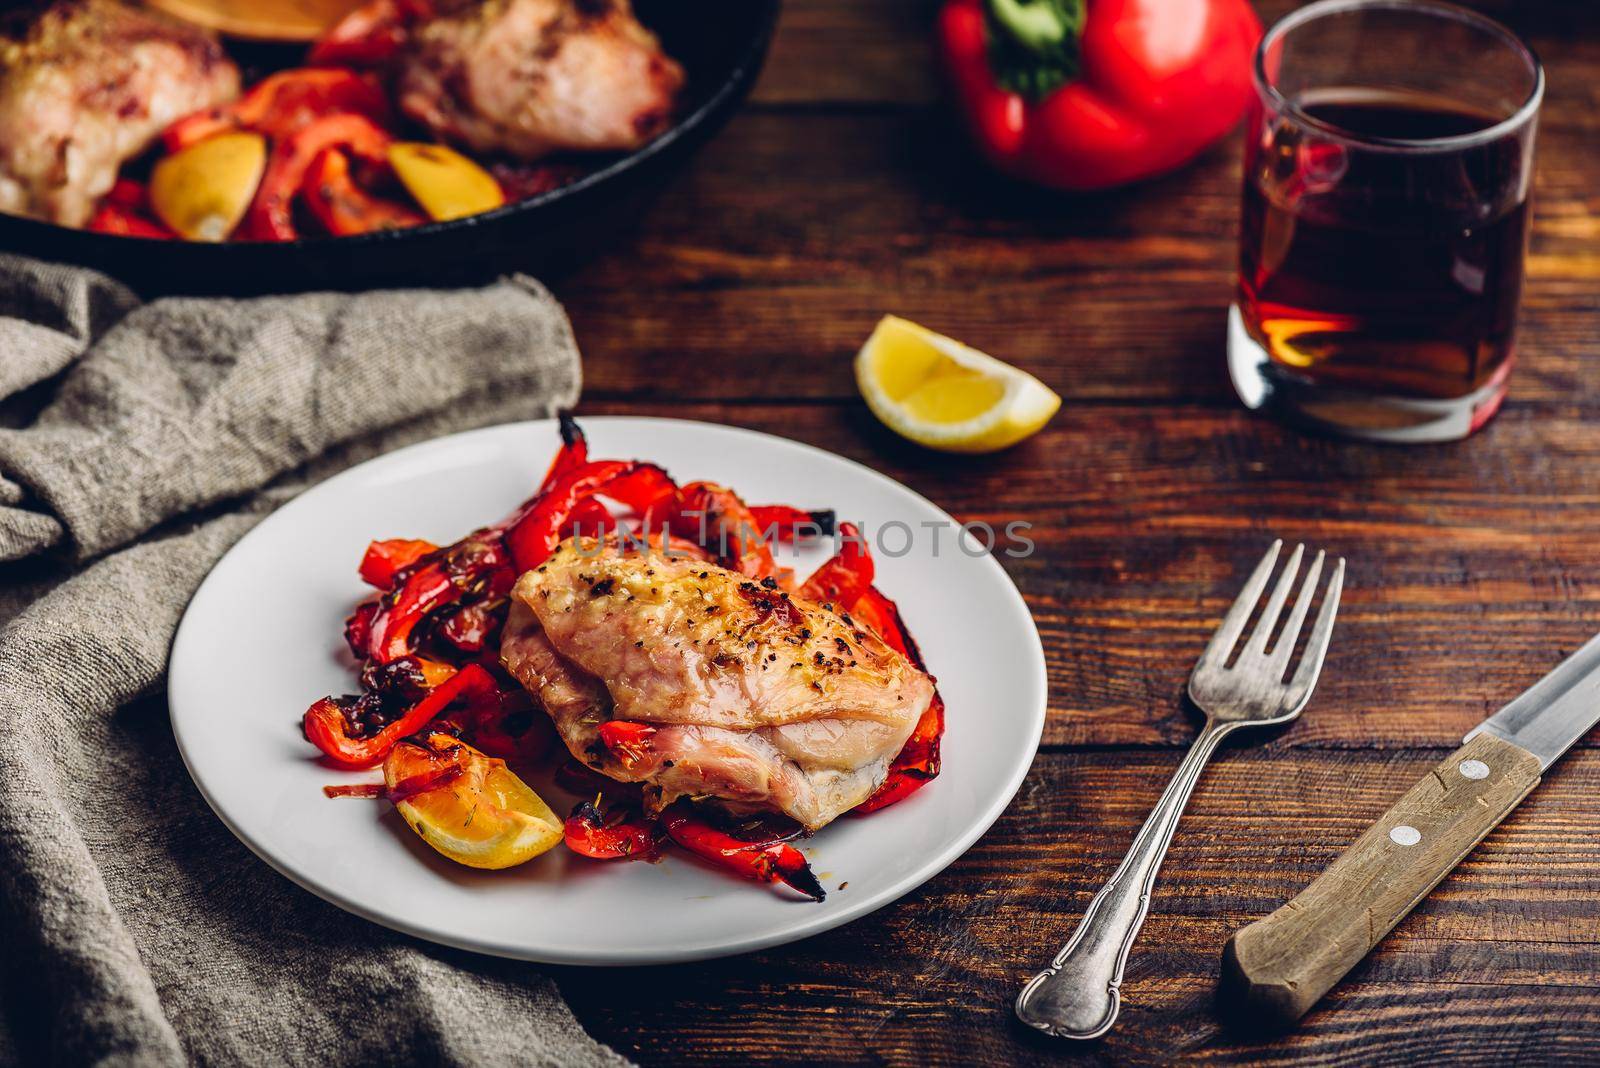 Baked chicken thighs with red bell peppers and lemon by Seva_blsv